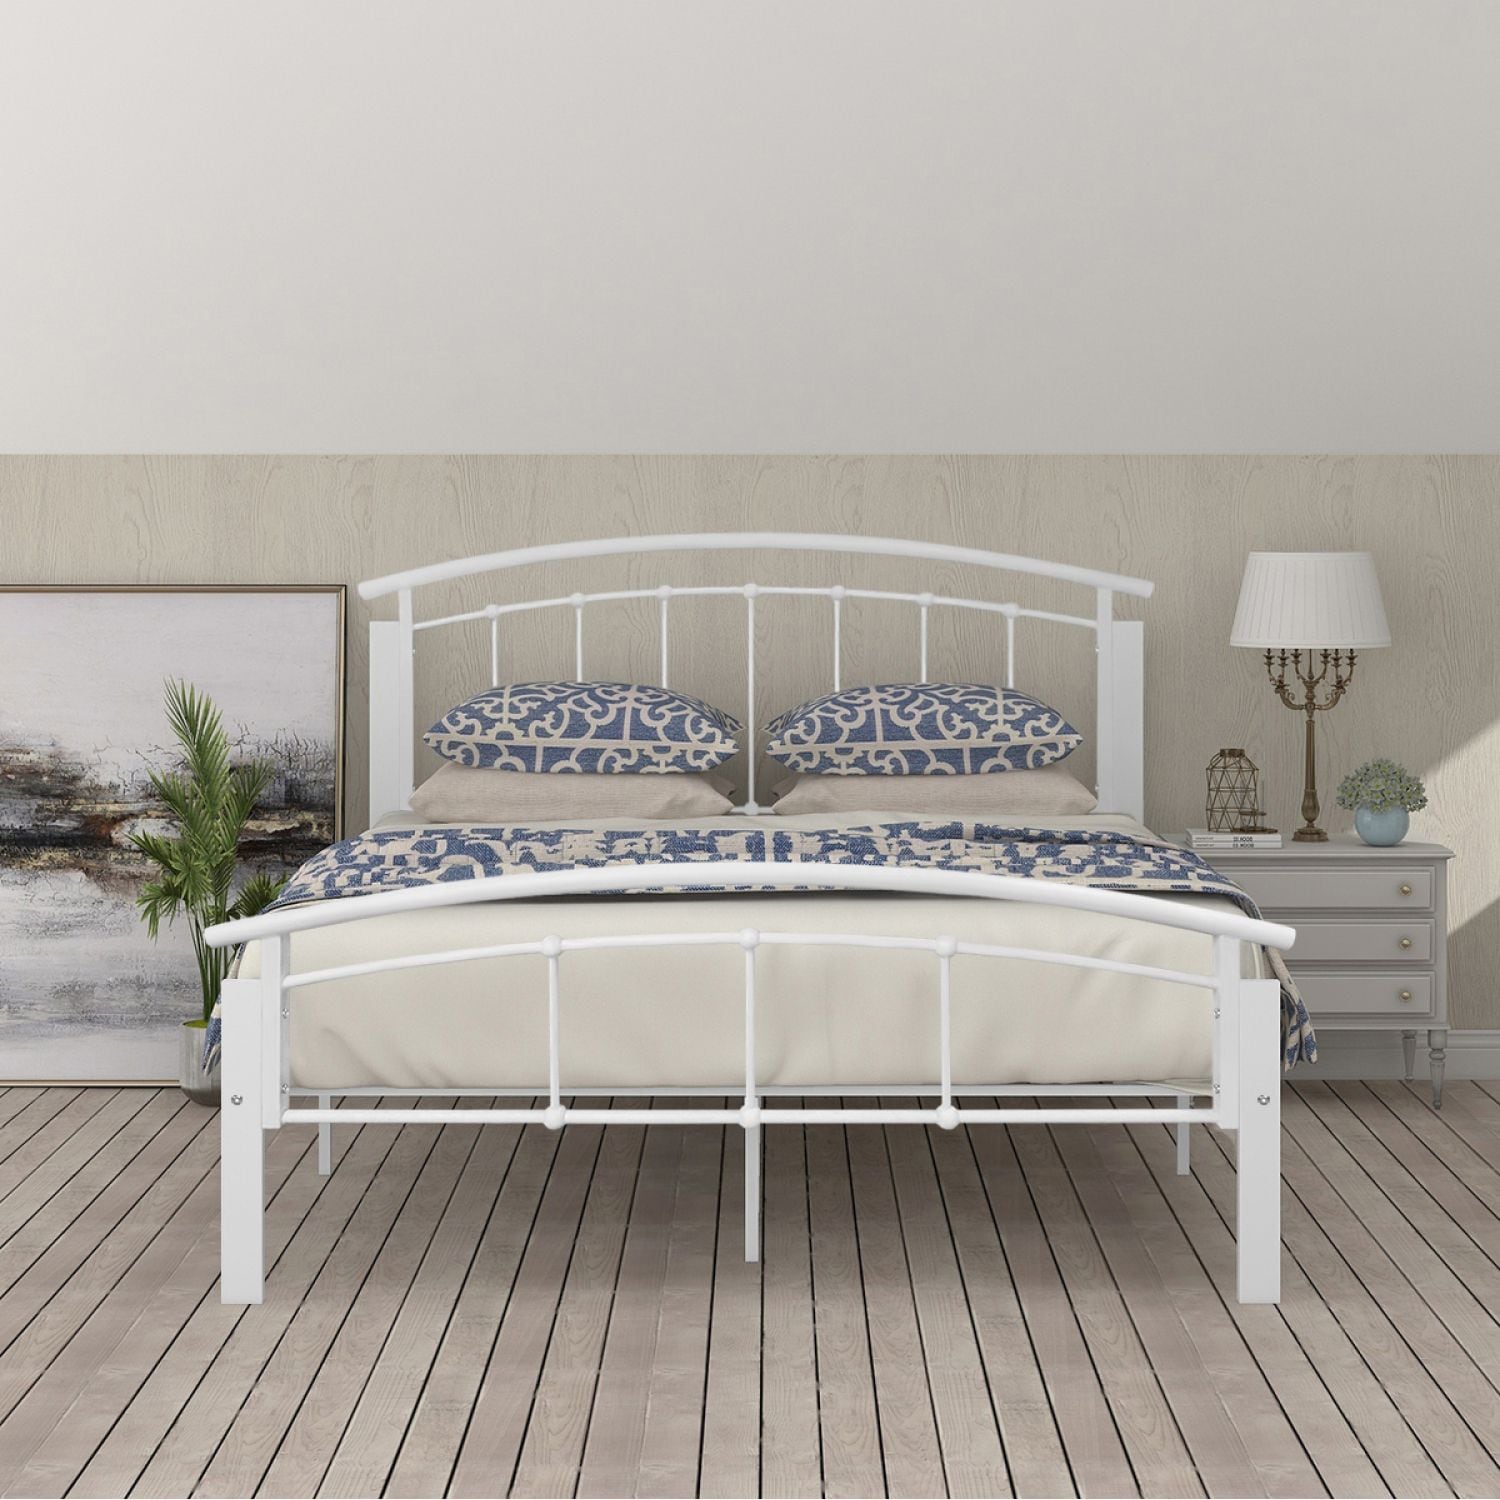 Bereiken lont maagd JASMODER Matte White Queen Contemporary Platform Bed in the Beds department  at Lowes.com